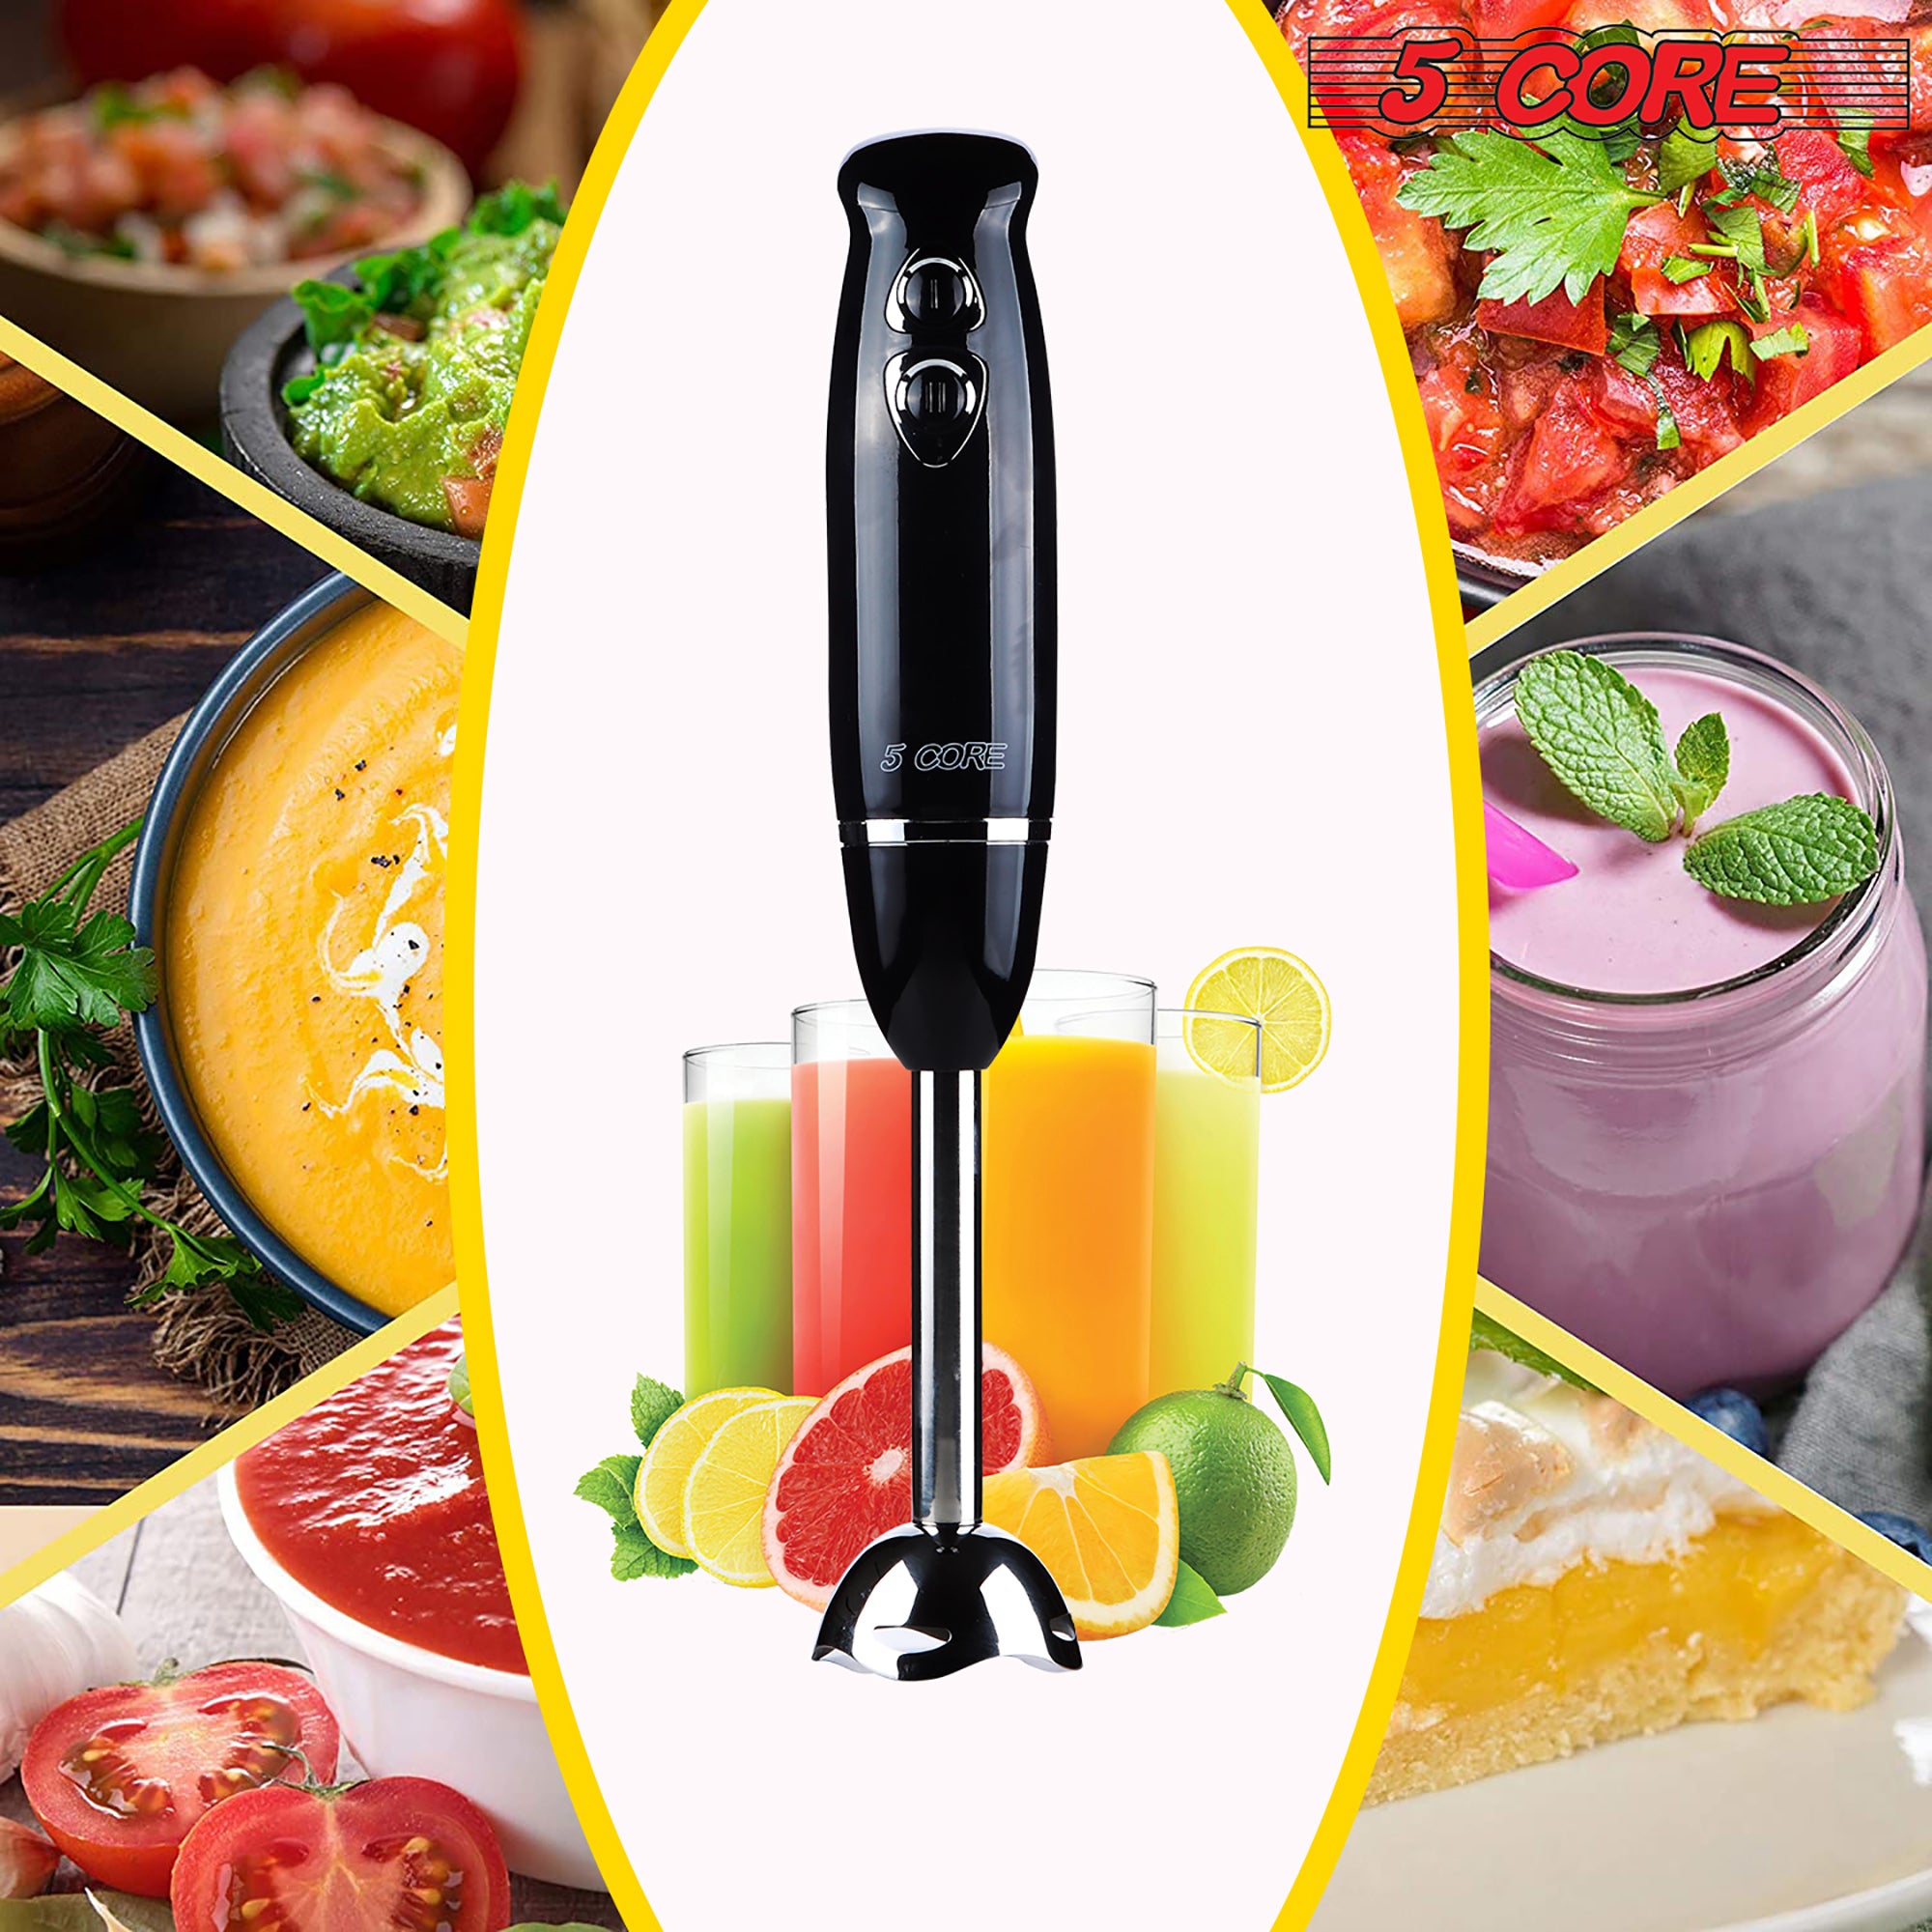 5 Core Hand Blender 500W Immersion Blender Electric Hand Mixer w 2 Mixing Speed 304 Steel Blades